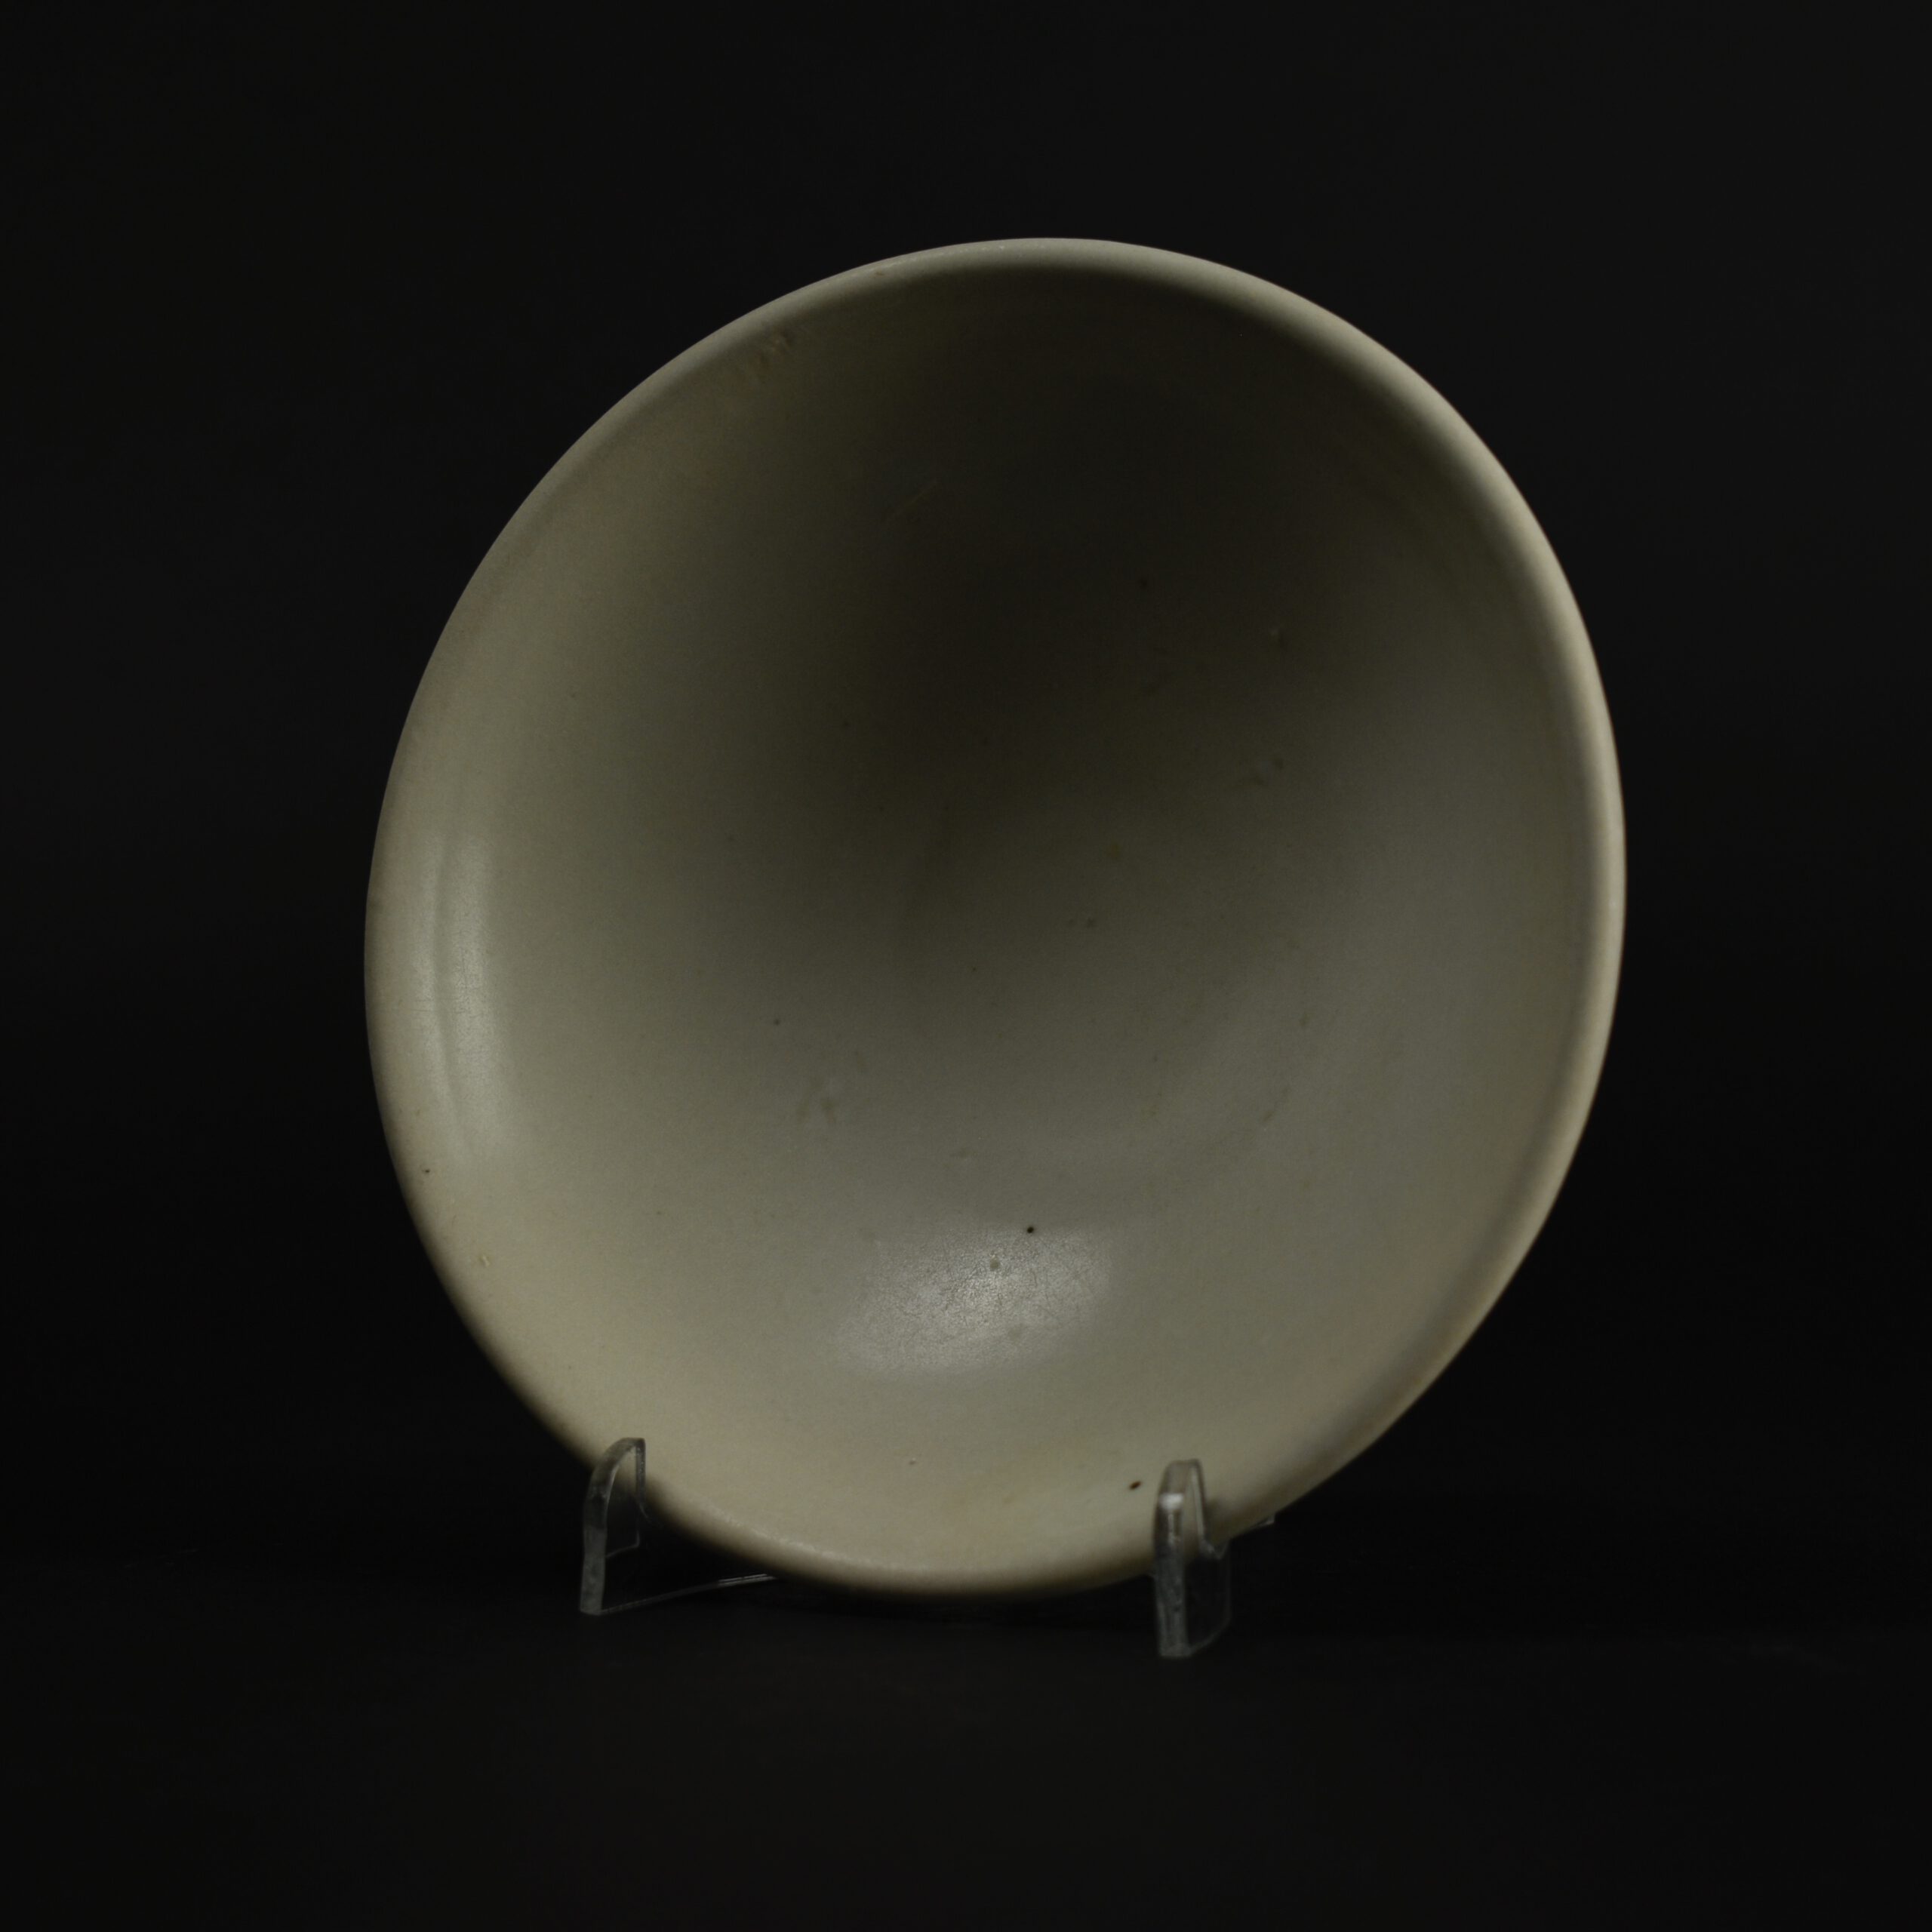 A rare and large 'Xing' conical bowl, Tang dynasty / Five